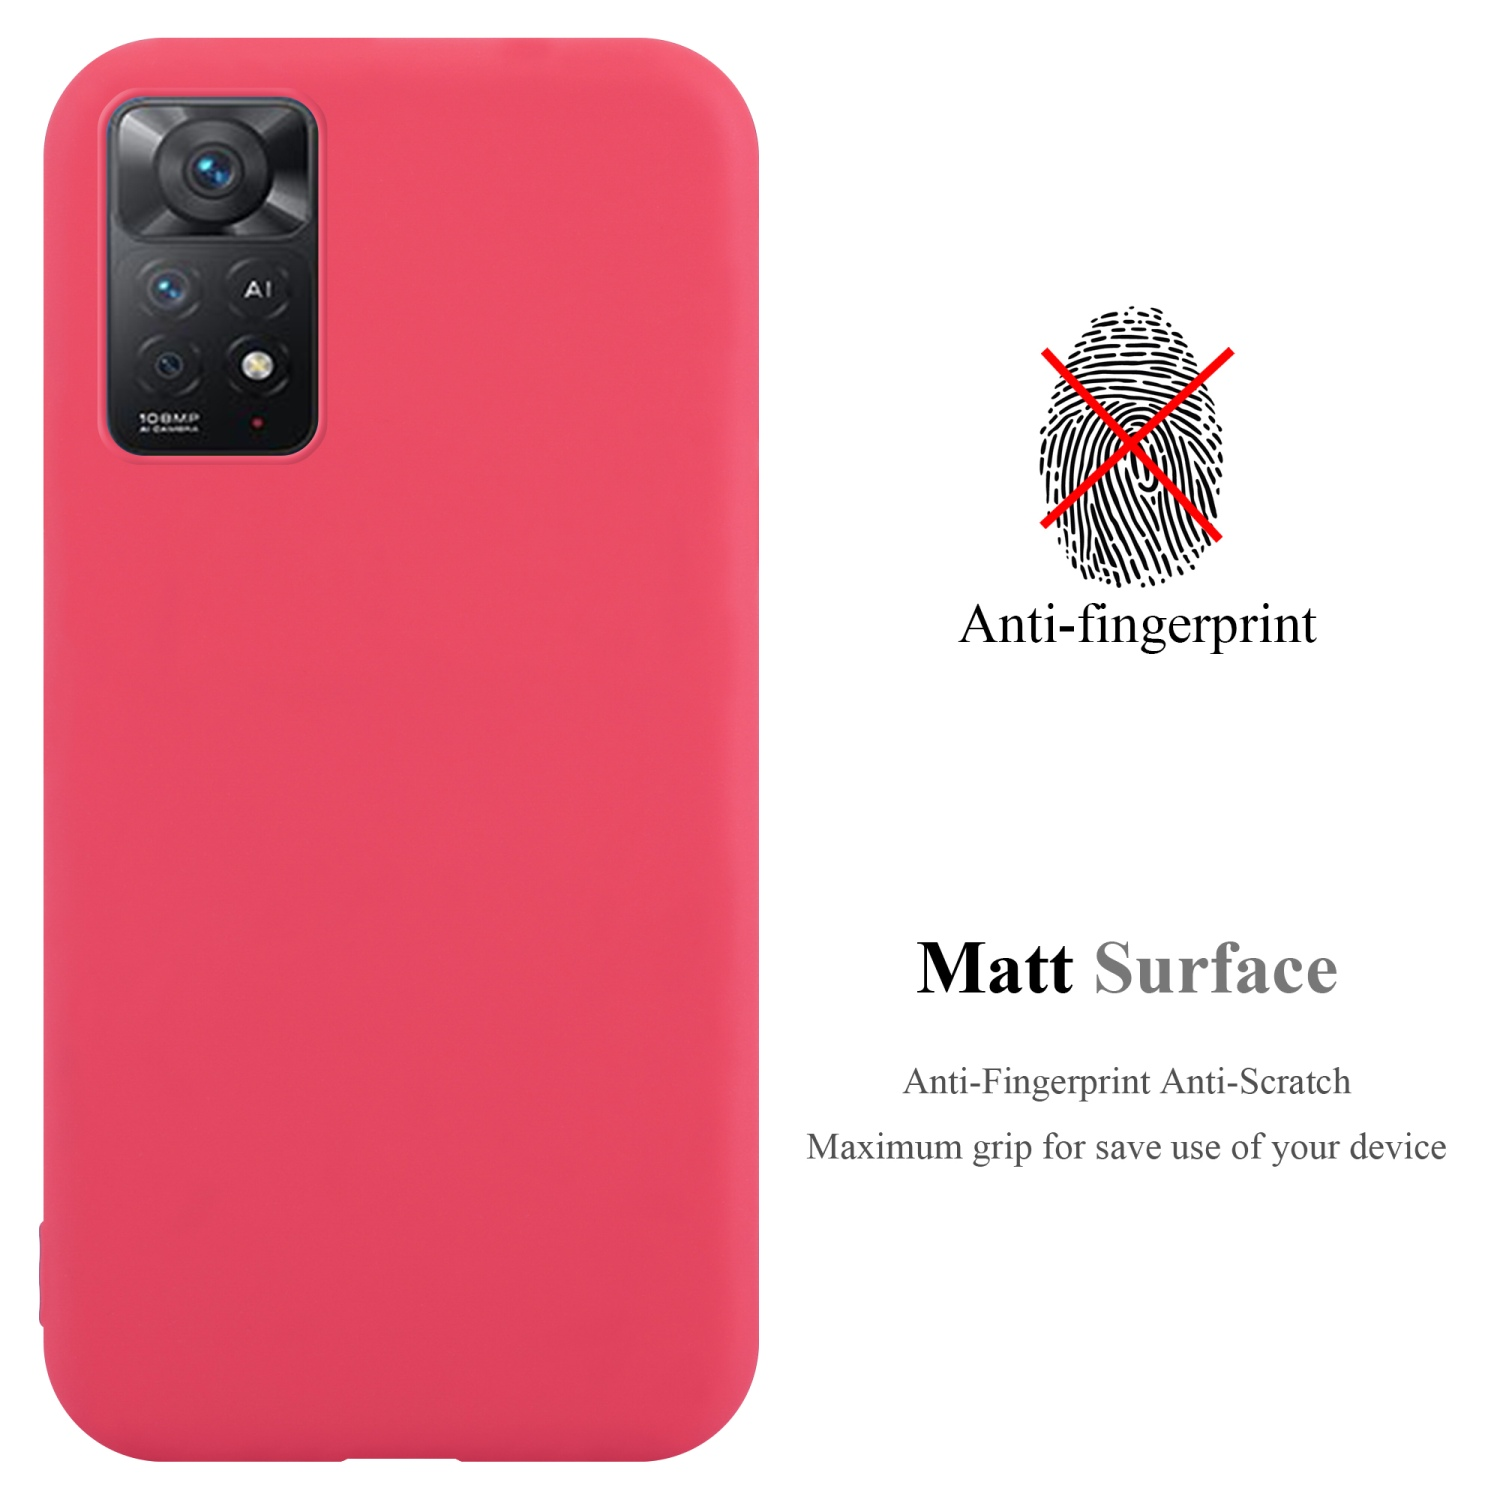 CANDY Candy ROT im 5G, RedMi / Style, Hülle NOTE Xiaomi, CADORABO Backcover, 11 TPU PRO 4G